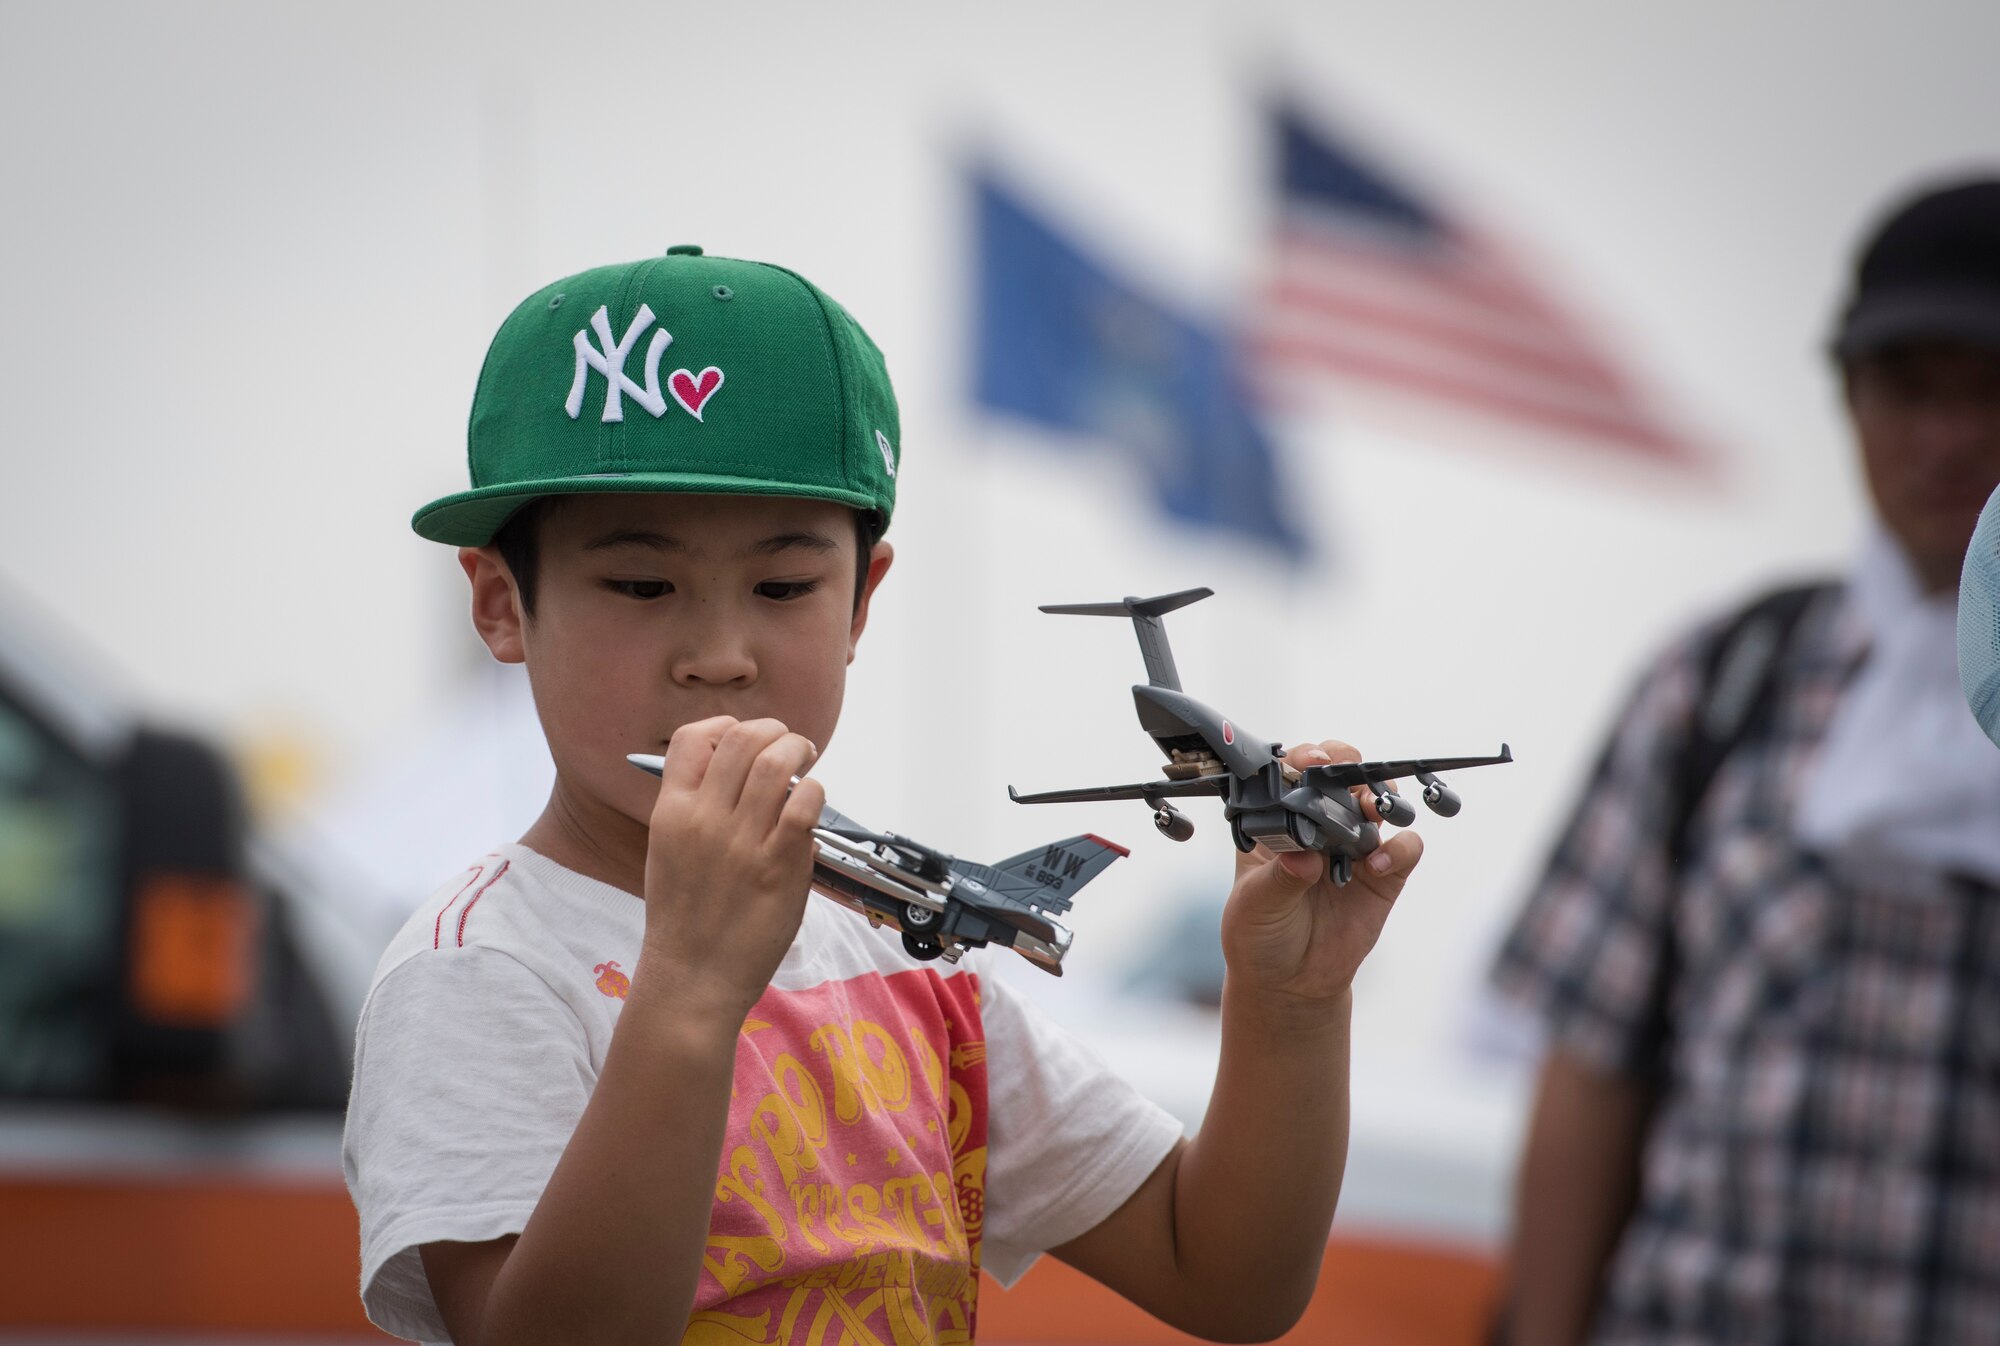 A boy plays with toy aircraft during the 2016 Japanese-American Friendship Festival at Yokota Air Base, Japan, Sept. 17, 2016. Tens of thousands of people attend the festival every year to learn more about the US military and American culture. (U.S. Air Force photo by Staff Sgt. Cody H. Ramirez/Released)